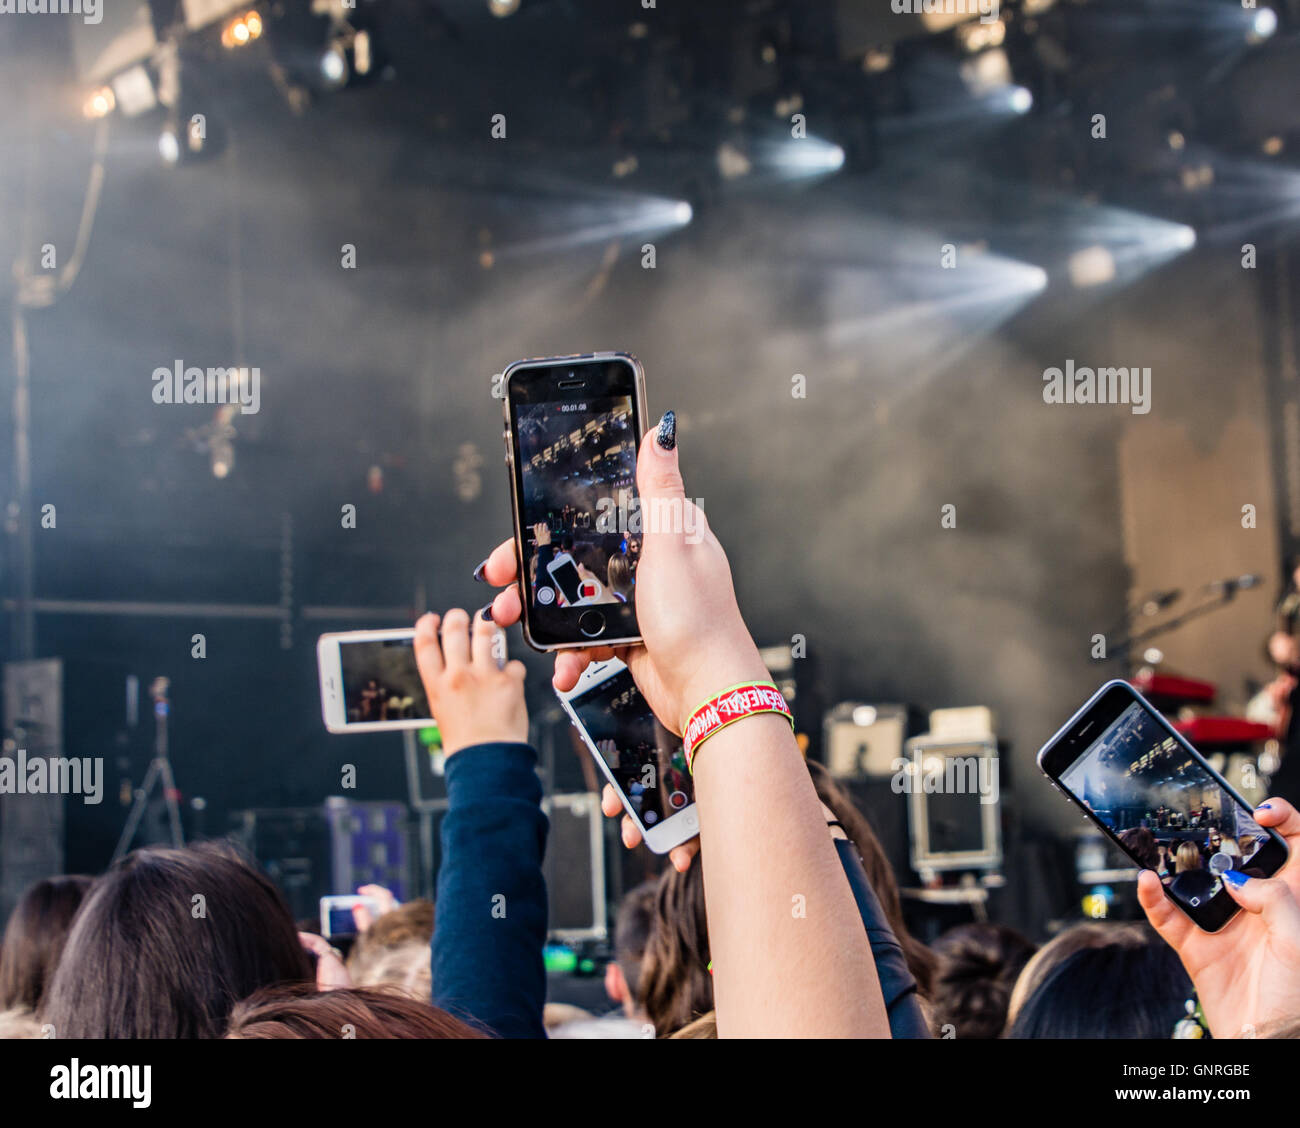 People at Festival No.6 Music Festival in Portmeirion Village, Gwynedd, Wales, UK using mobile phones to record performers. Stock Photo